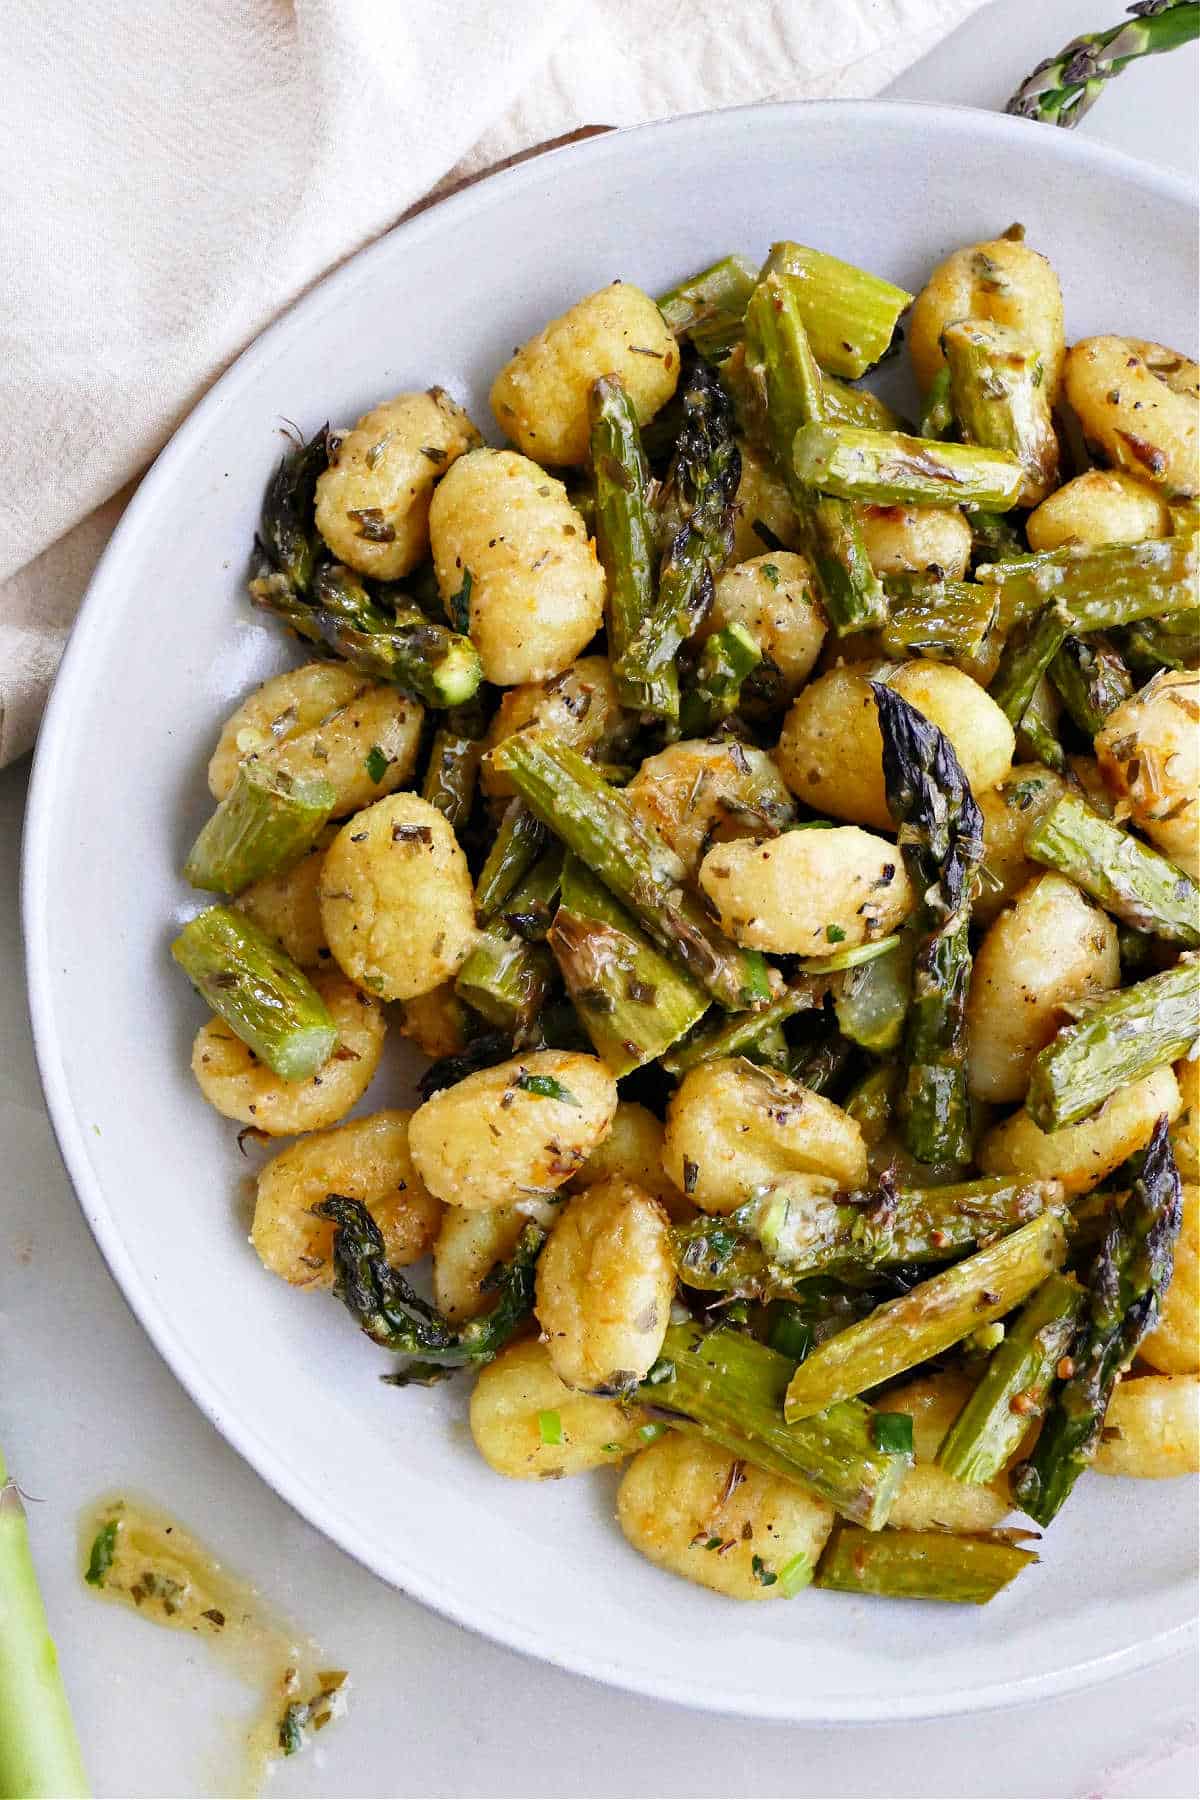 gnocchi and asparagus meal topped with Meyer lemon dressing on a plate